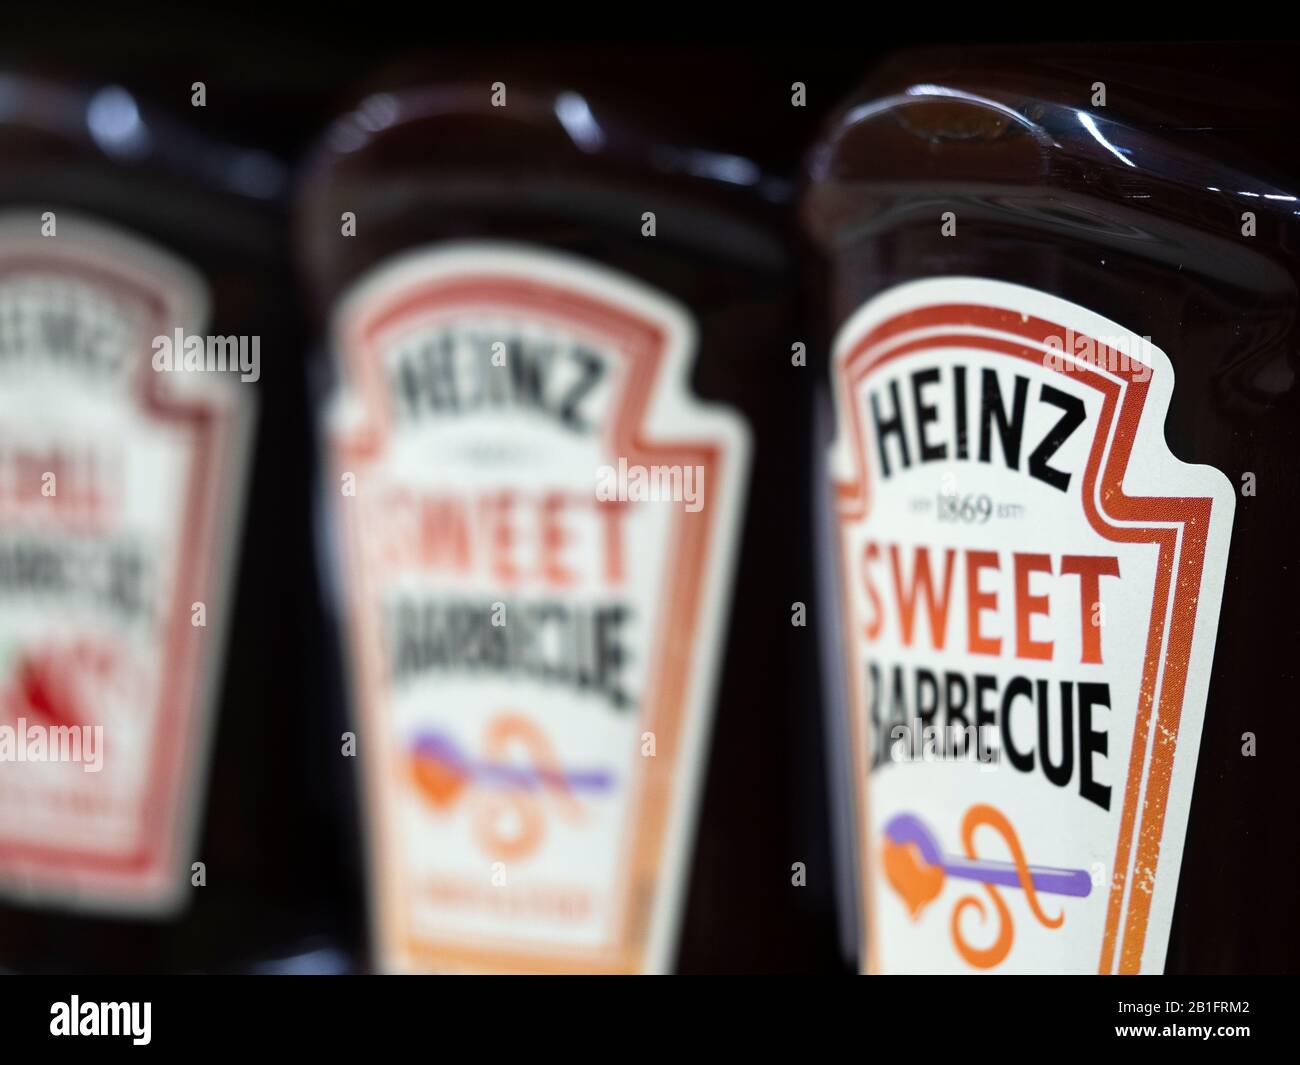 Heinz Sweet Barbecue sauce on a shelf in a store Stock Photo - Alamy